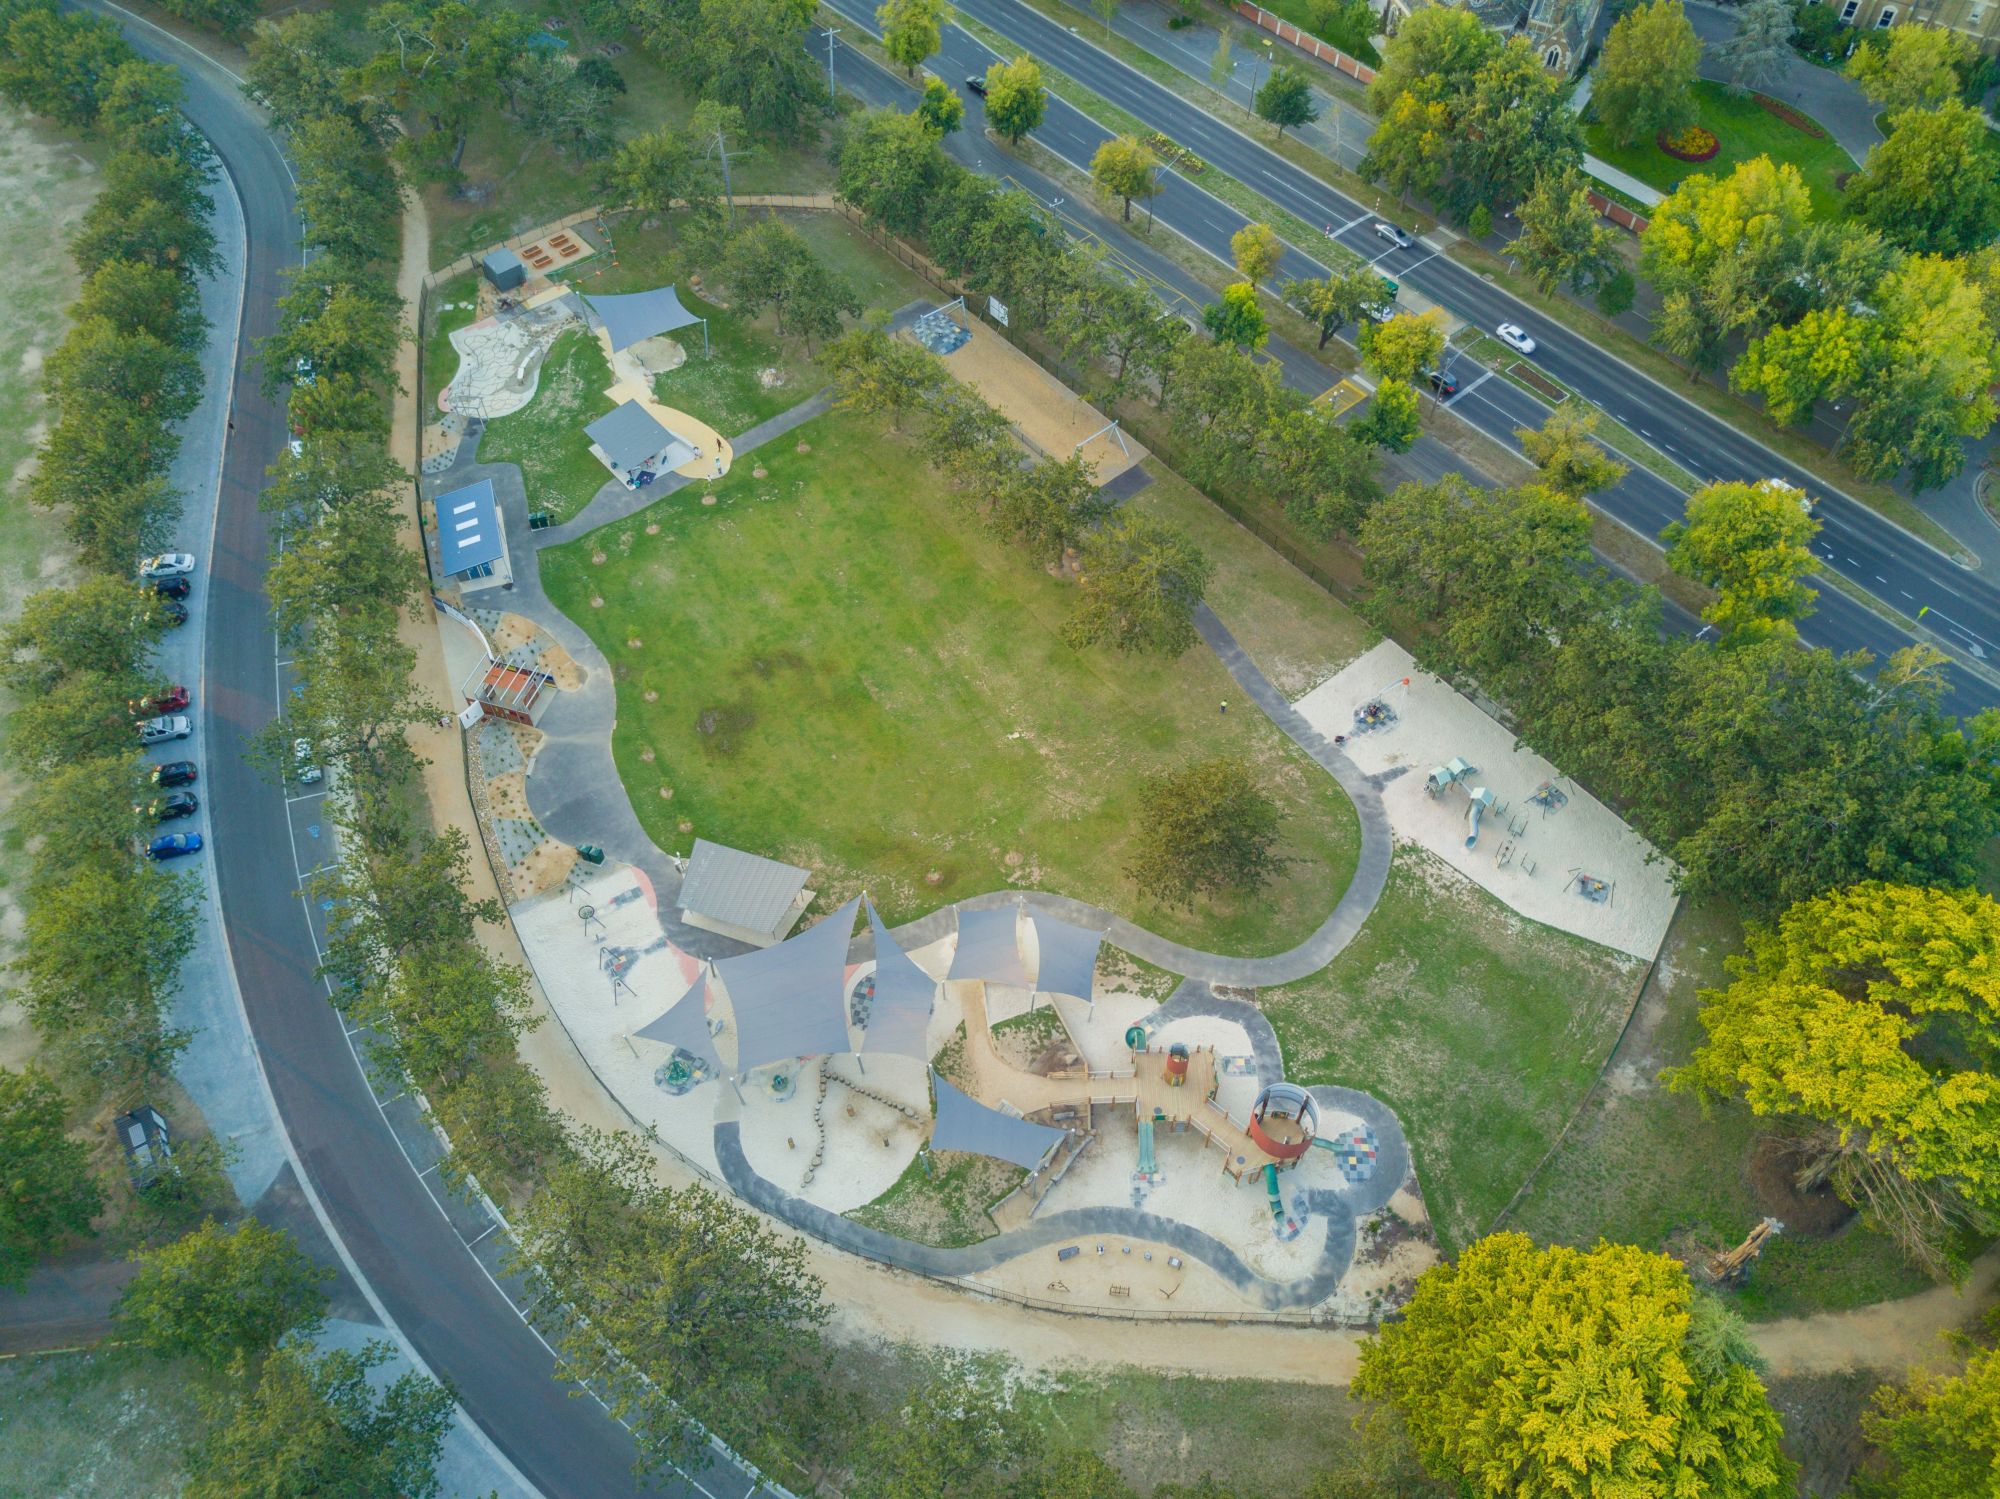 Drone photo of the Victoria Park Inclusive Play Space 